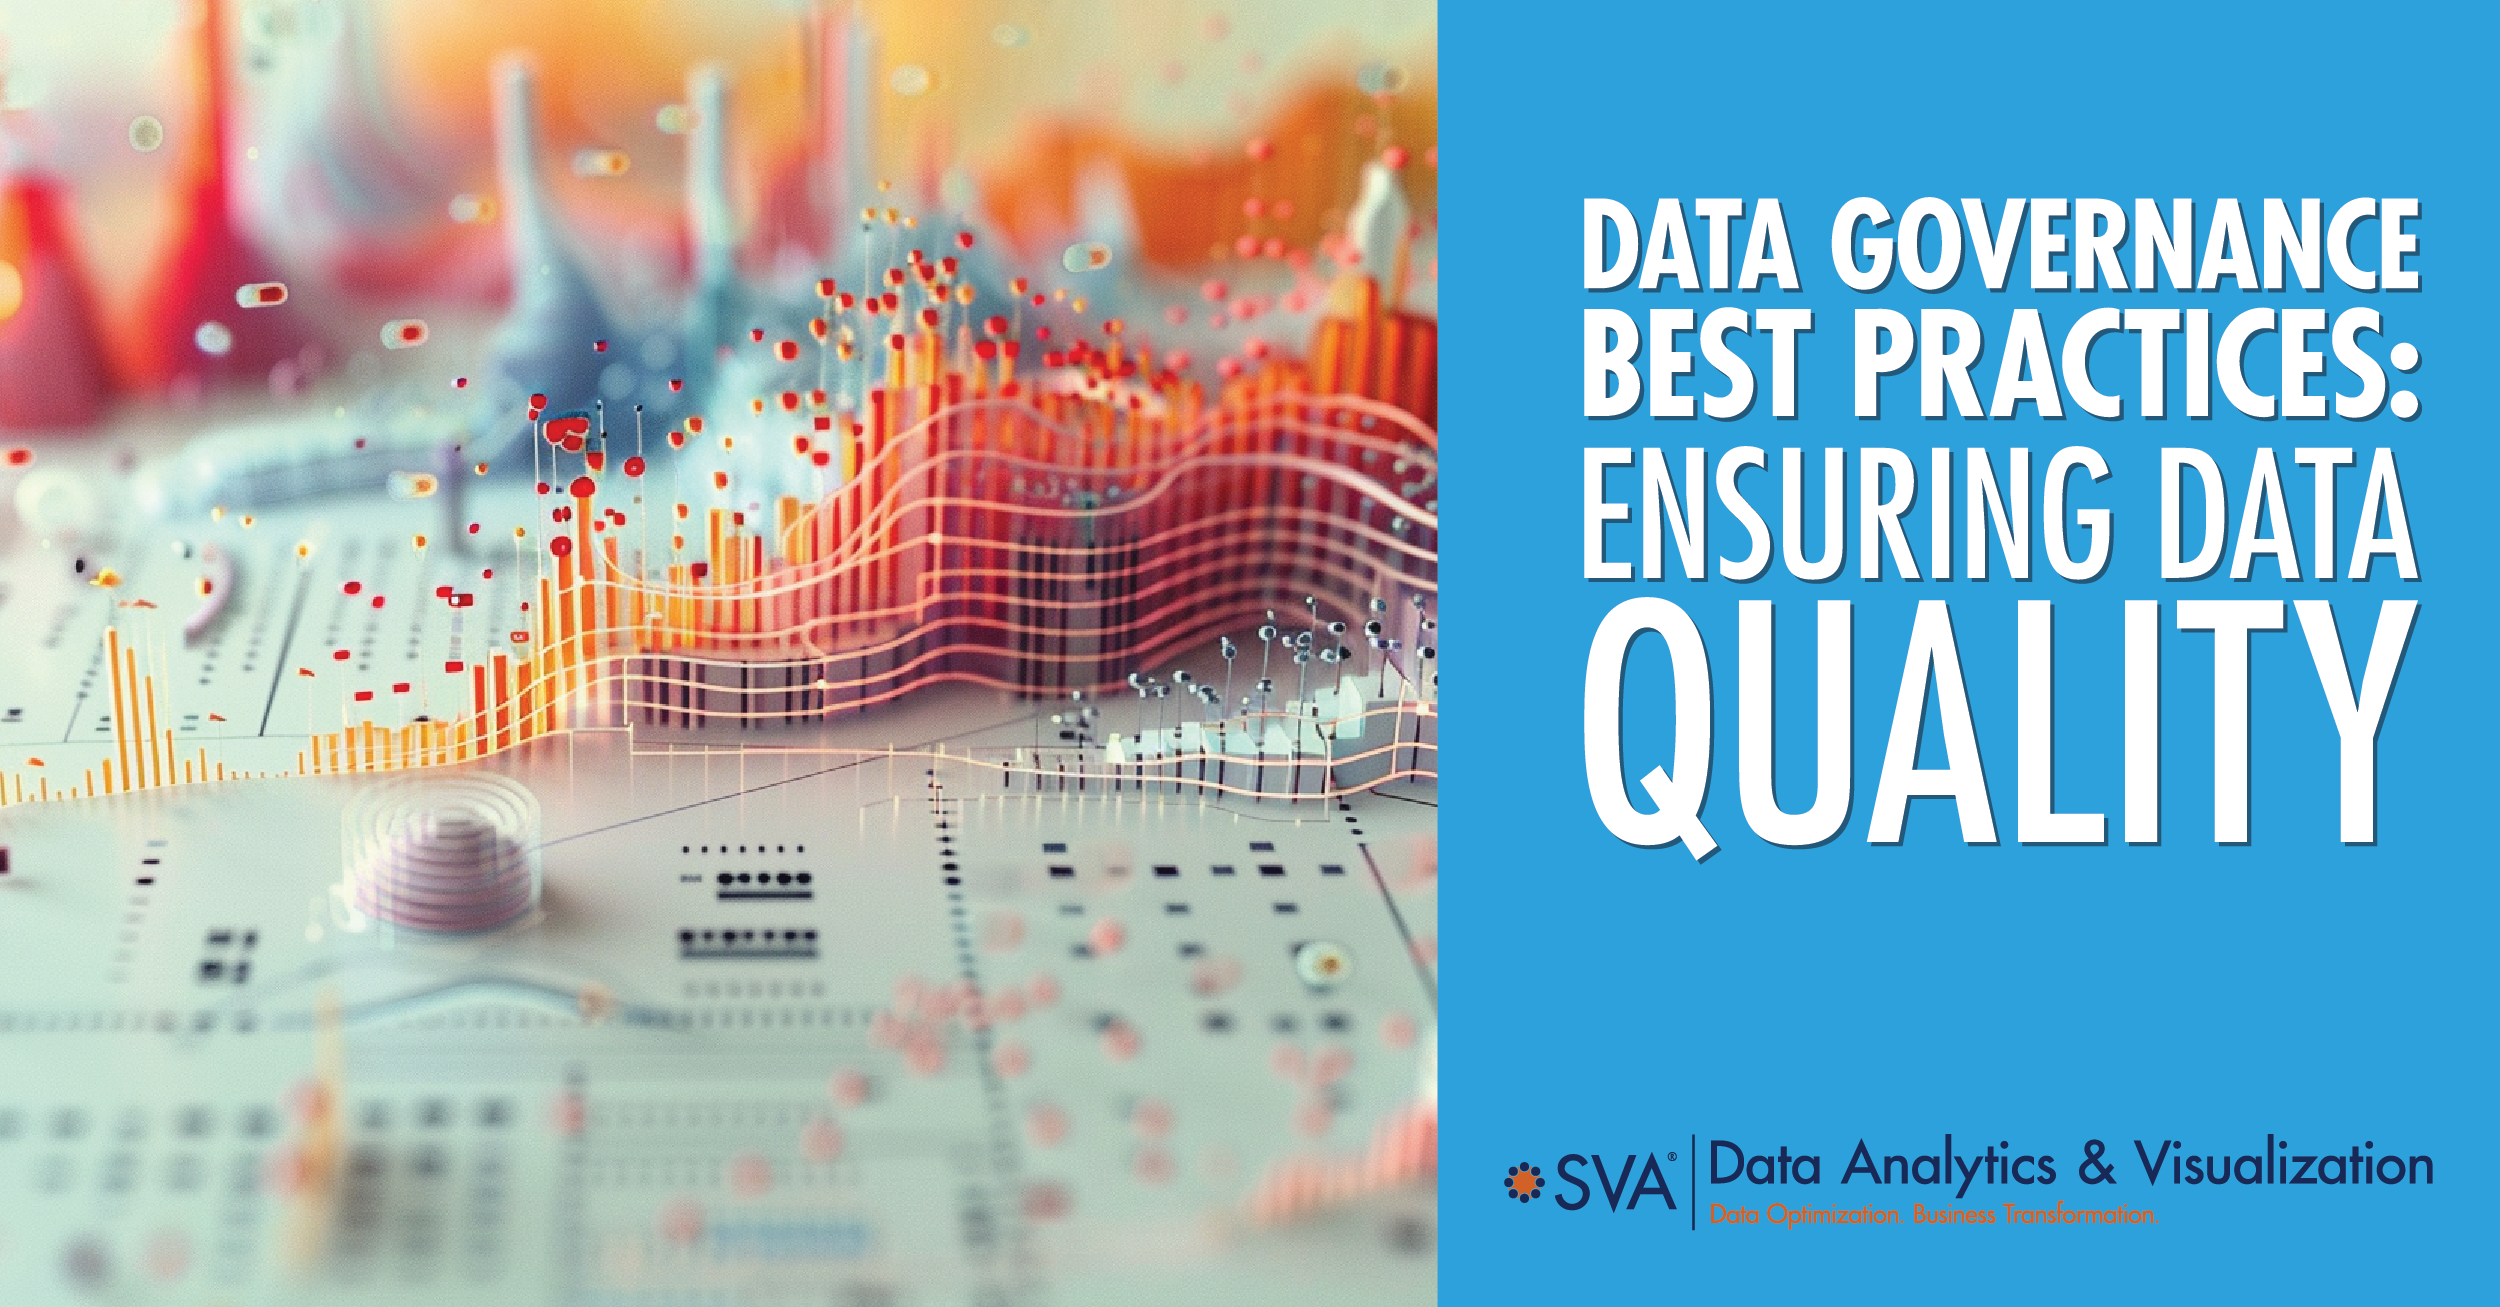 Ensure Data Quality By Using Data Governance Best Practices